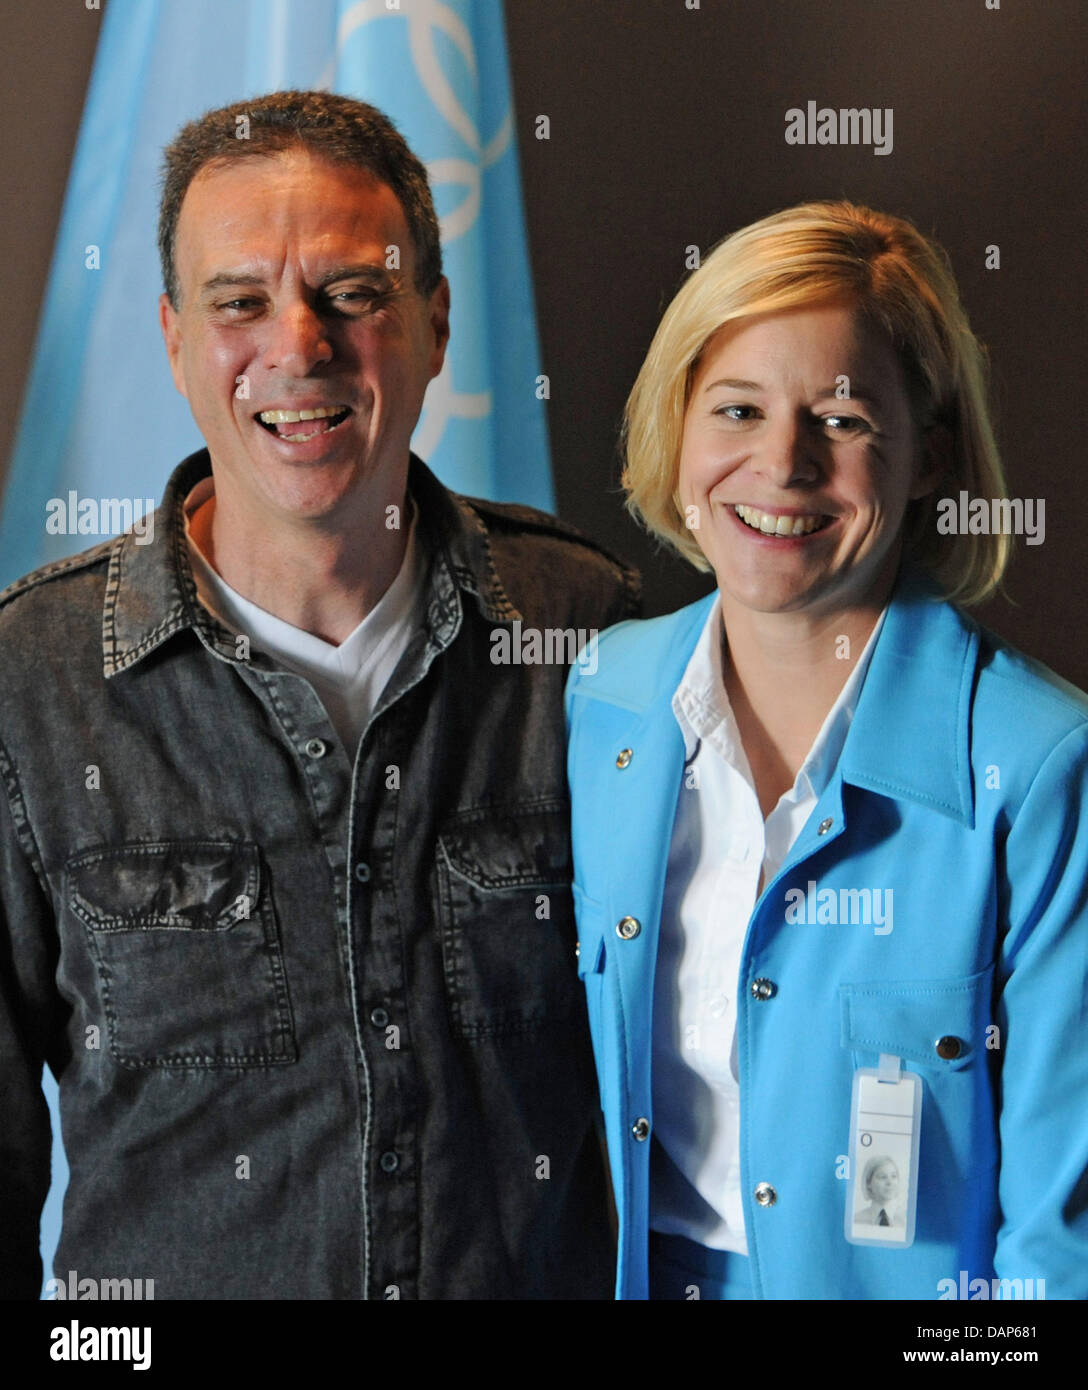 Director Dror Zahavi (L) from Israel and actress Schauspielerin Bernadette Heerwagen (as Anna Gerbers) pose during an on-set photo shoot of the Second German Television ZDF film 'Muenchen 72' ('Munich 72') in Munich, Germany, 27 July 2011. The movie is shot at original sites and deals with the  Munich massacre of 1972 Olympics, in which Israeli athletes had been taken hostage. Phot Stock Photo